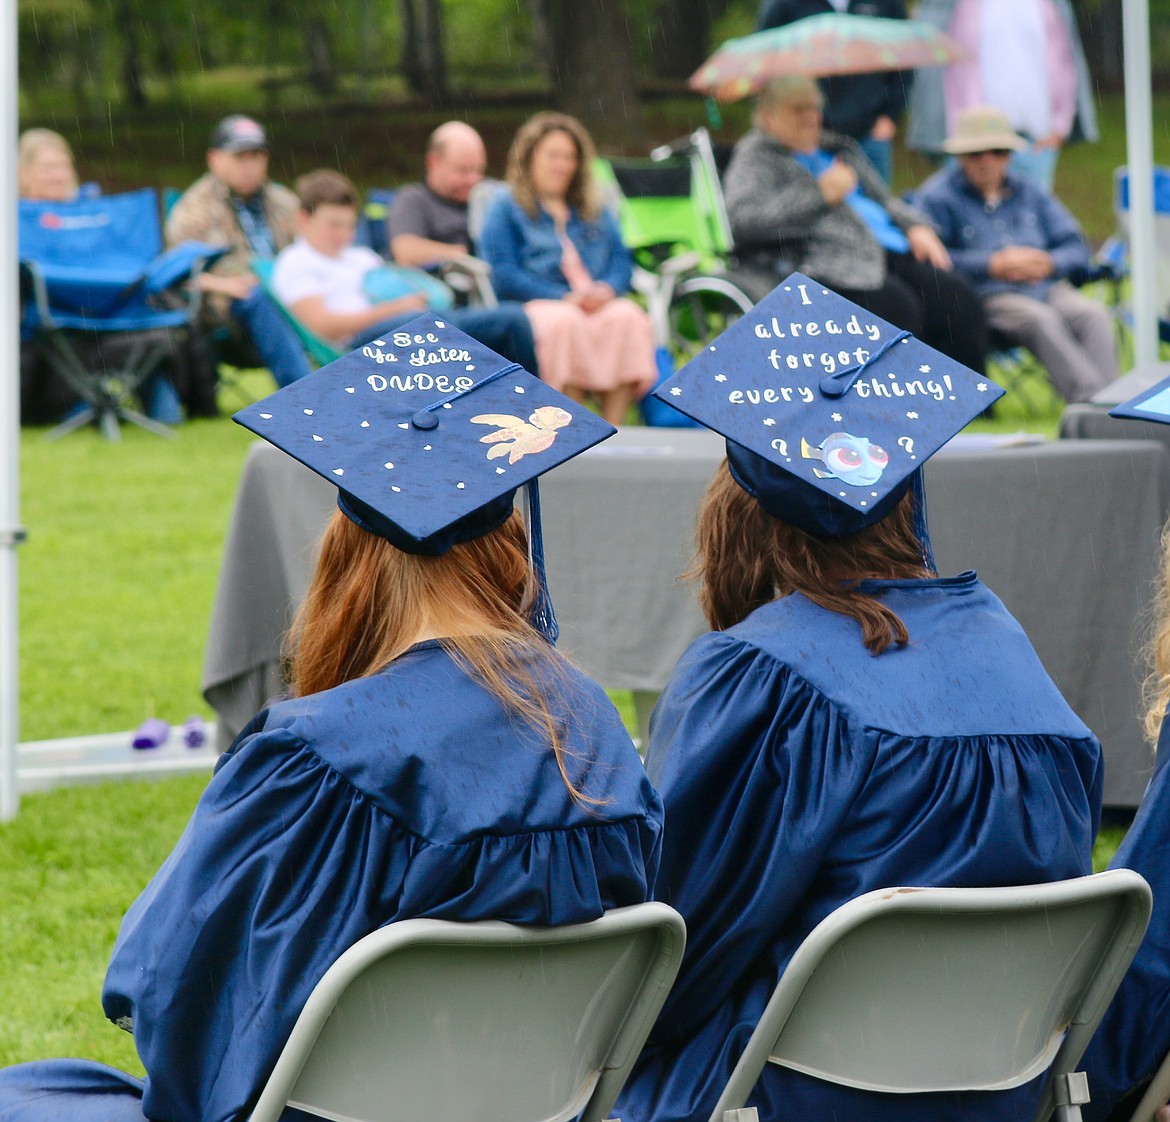 Some fun decorated caps from the Class of 2022 at the June 4, graduation.